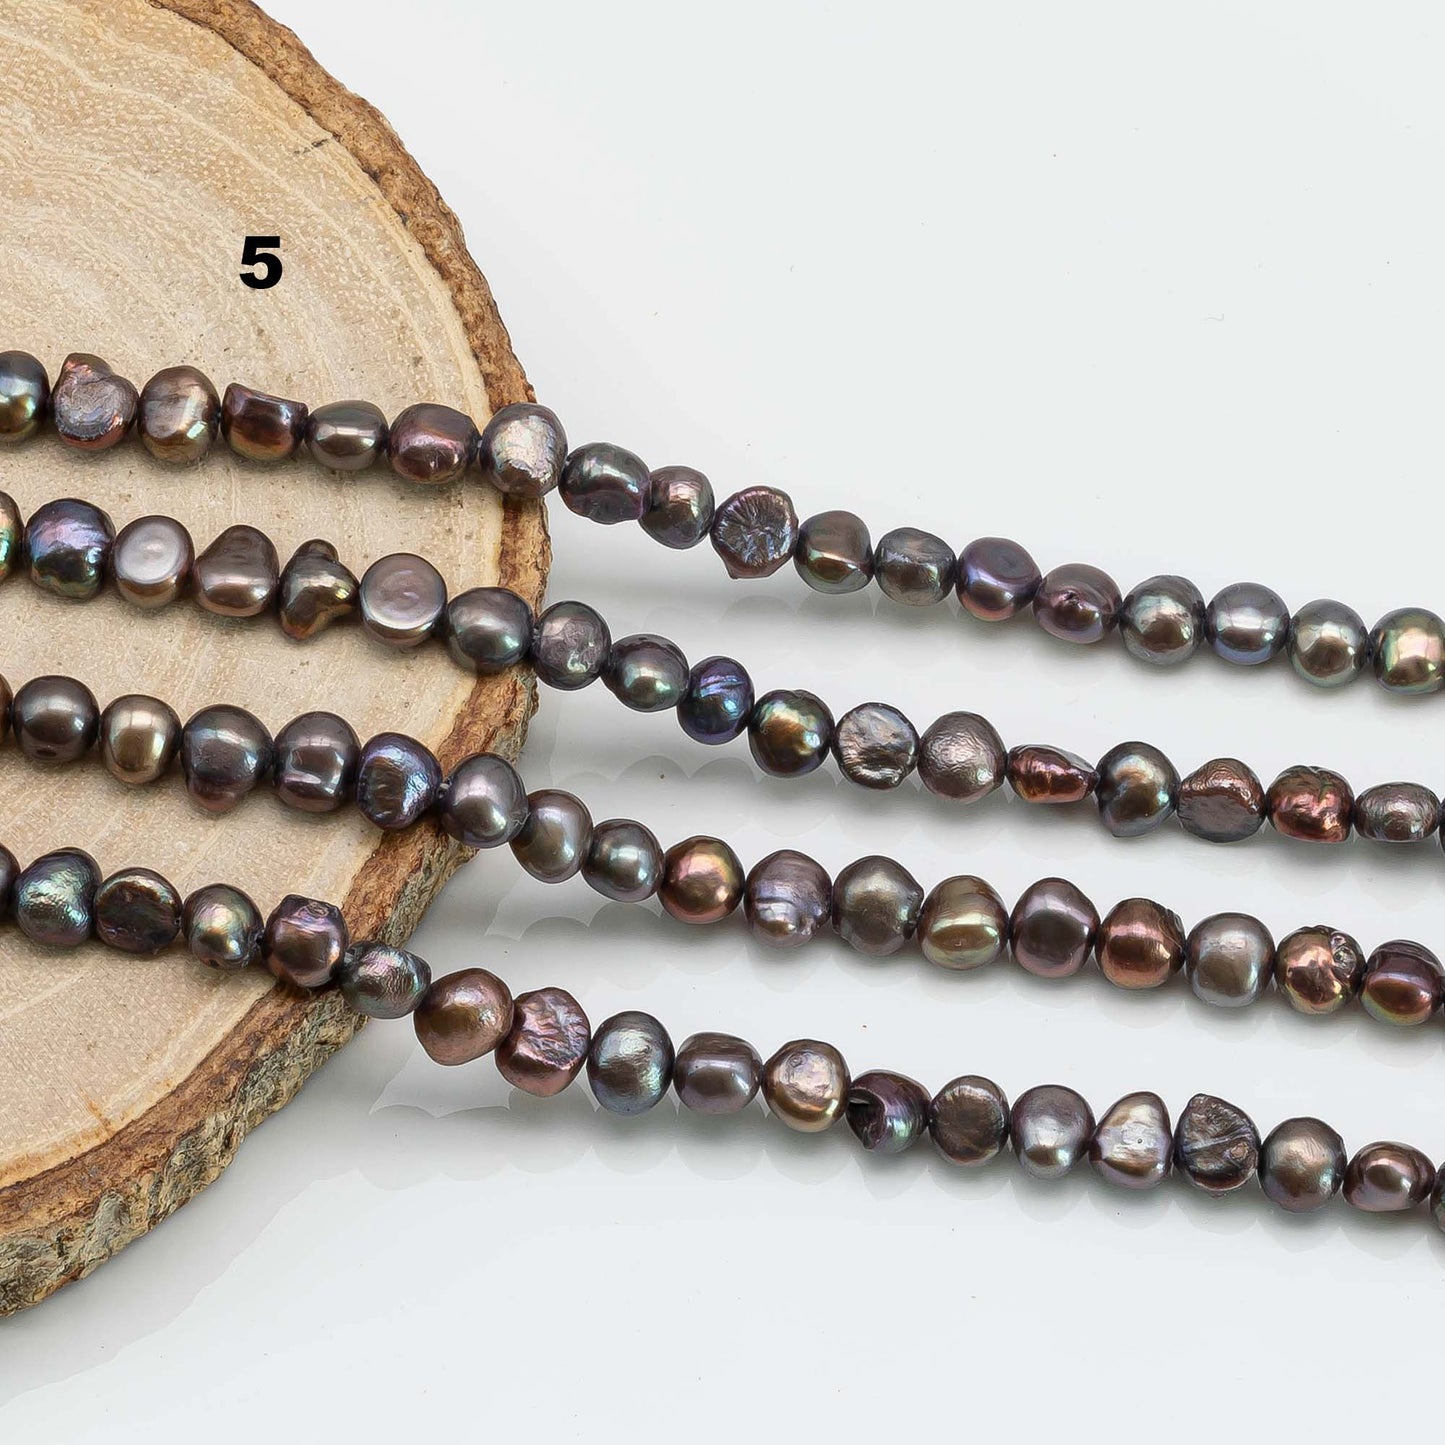 5-6mm Freshwater Pearl Tiny Nugget, Choose Between Brown, Cranberry or Green Color Beads in Full Strand for DYI Project, SKU # 1592FW